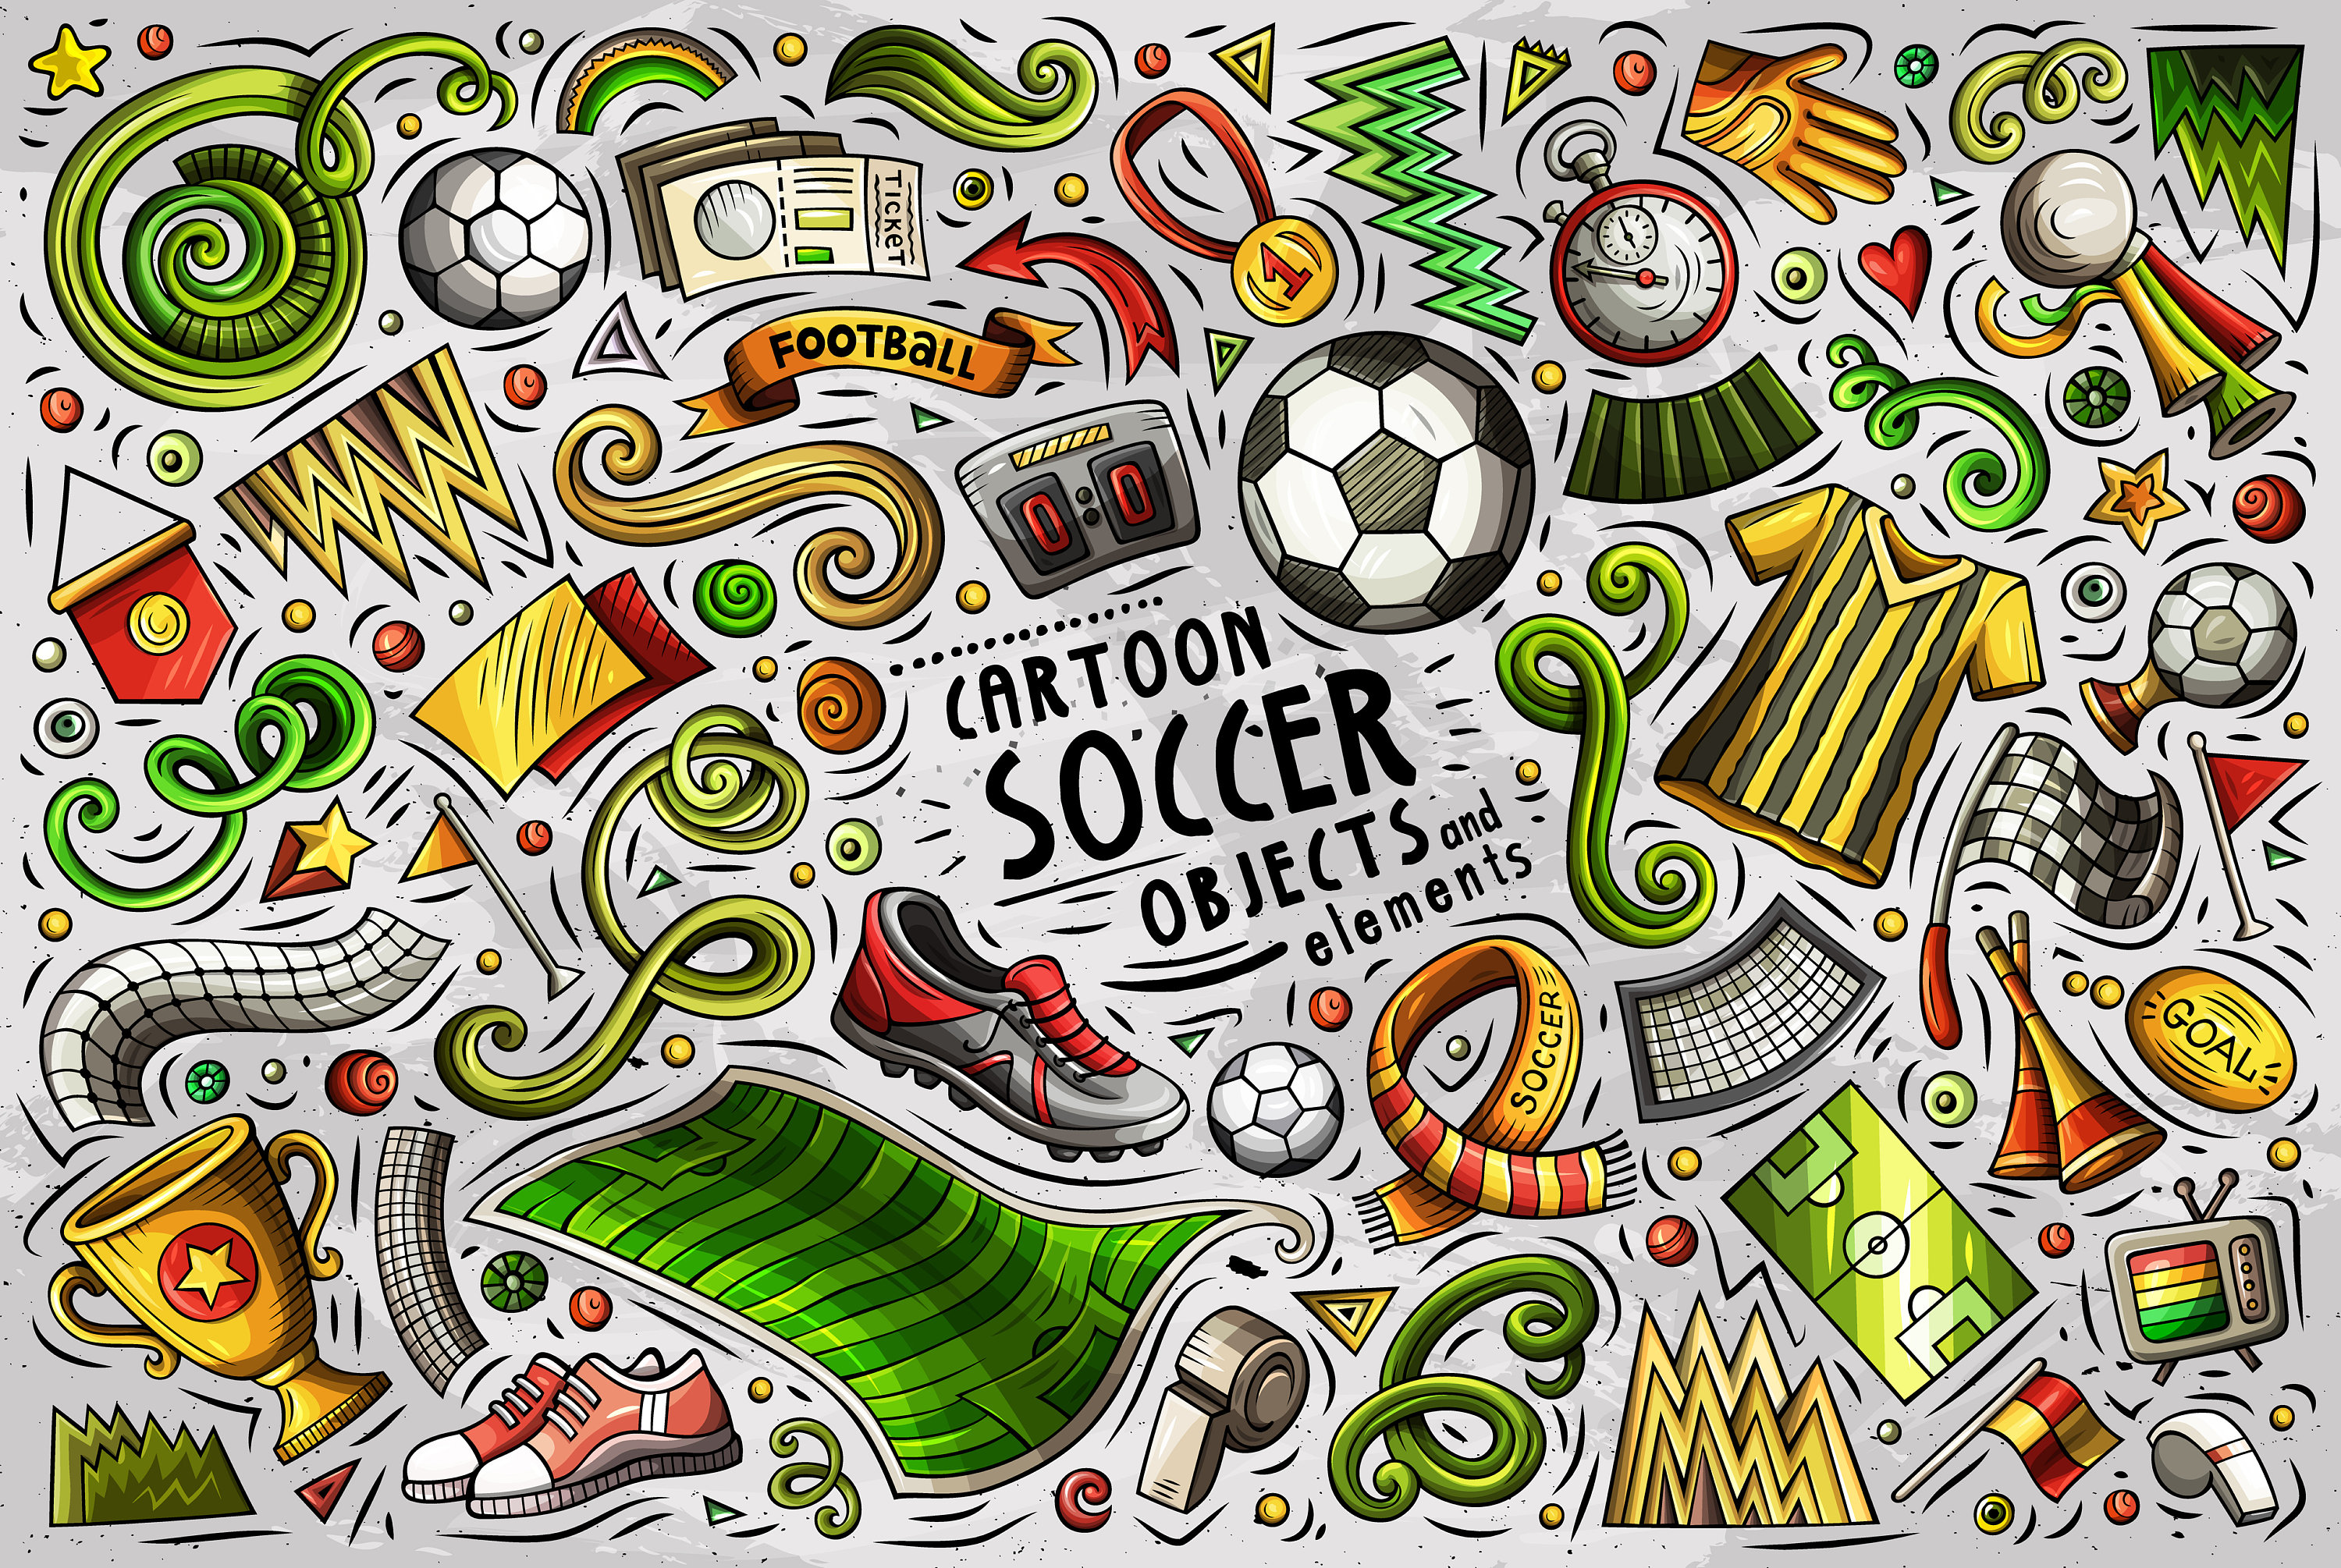 Football Soccer Related Objects Sport Illustration Vector Graphic Design  Set Royalty Free SVG, Cliparts, Vectors, and Stock Illustration. Image  96219020.